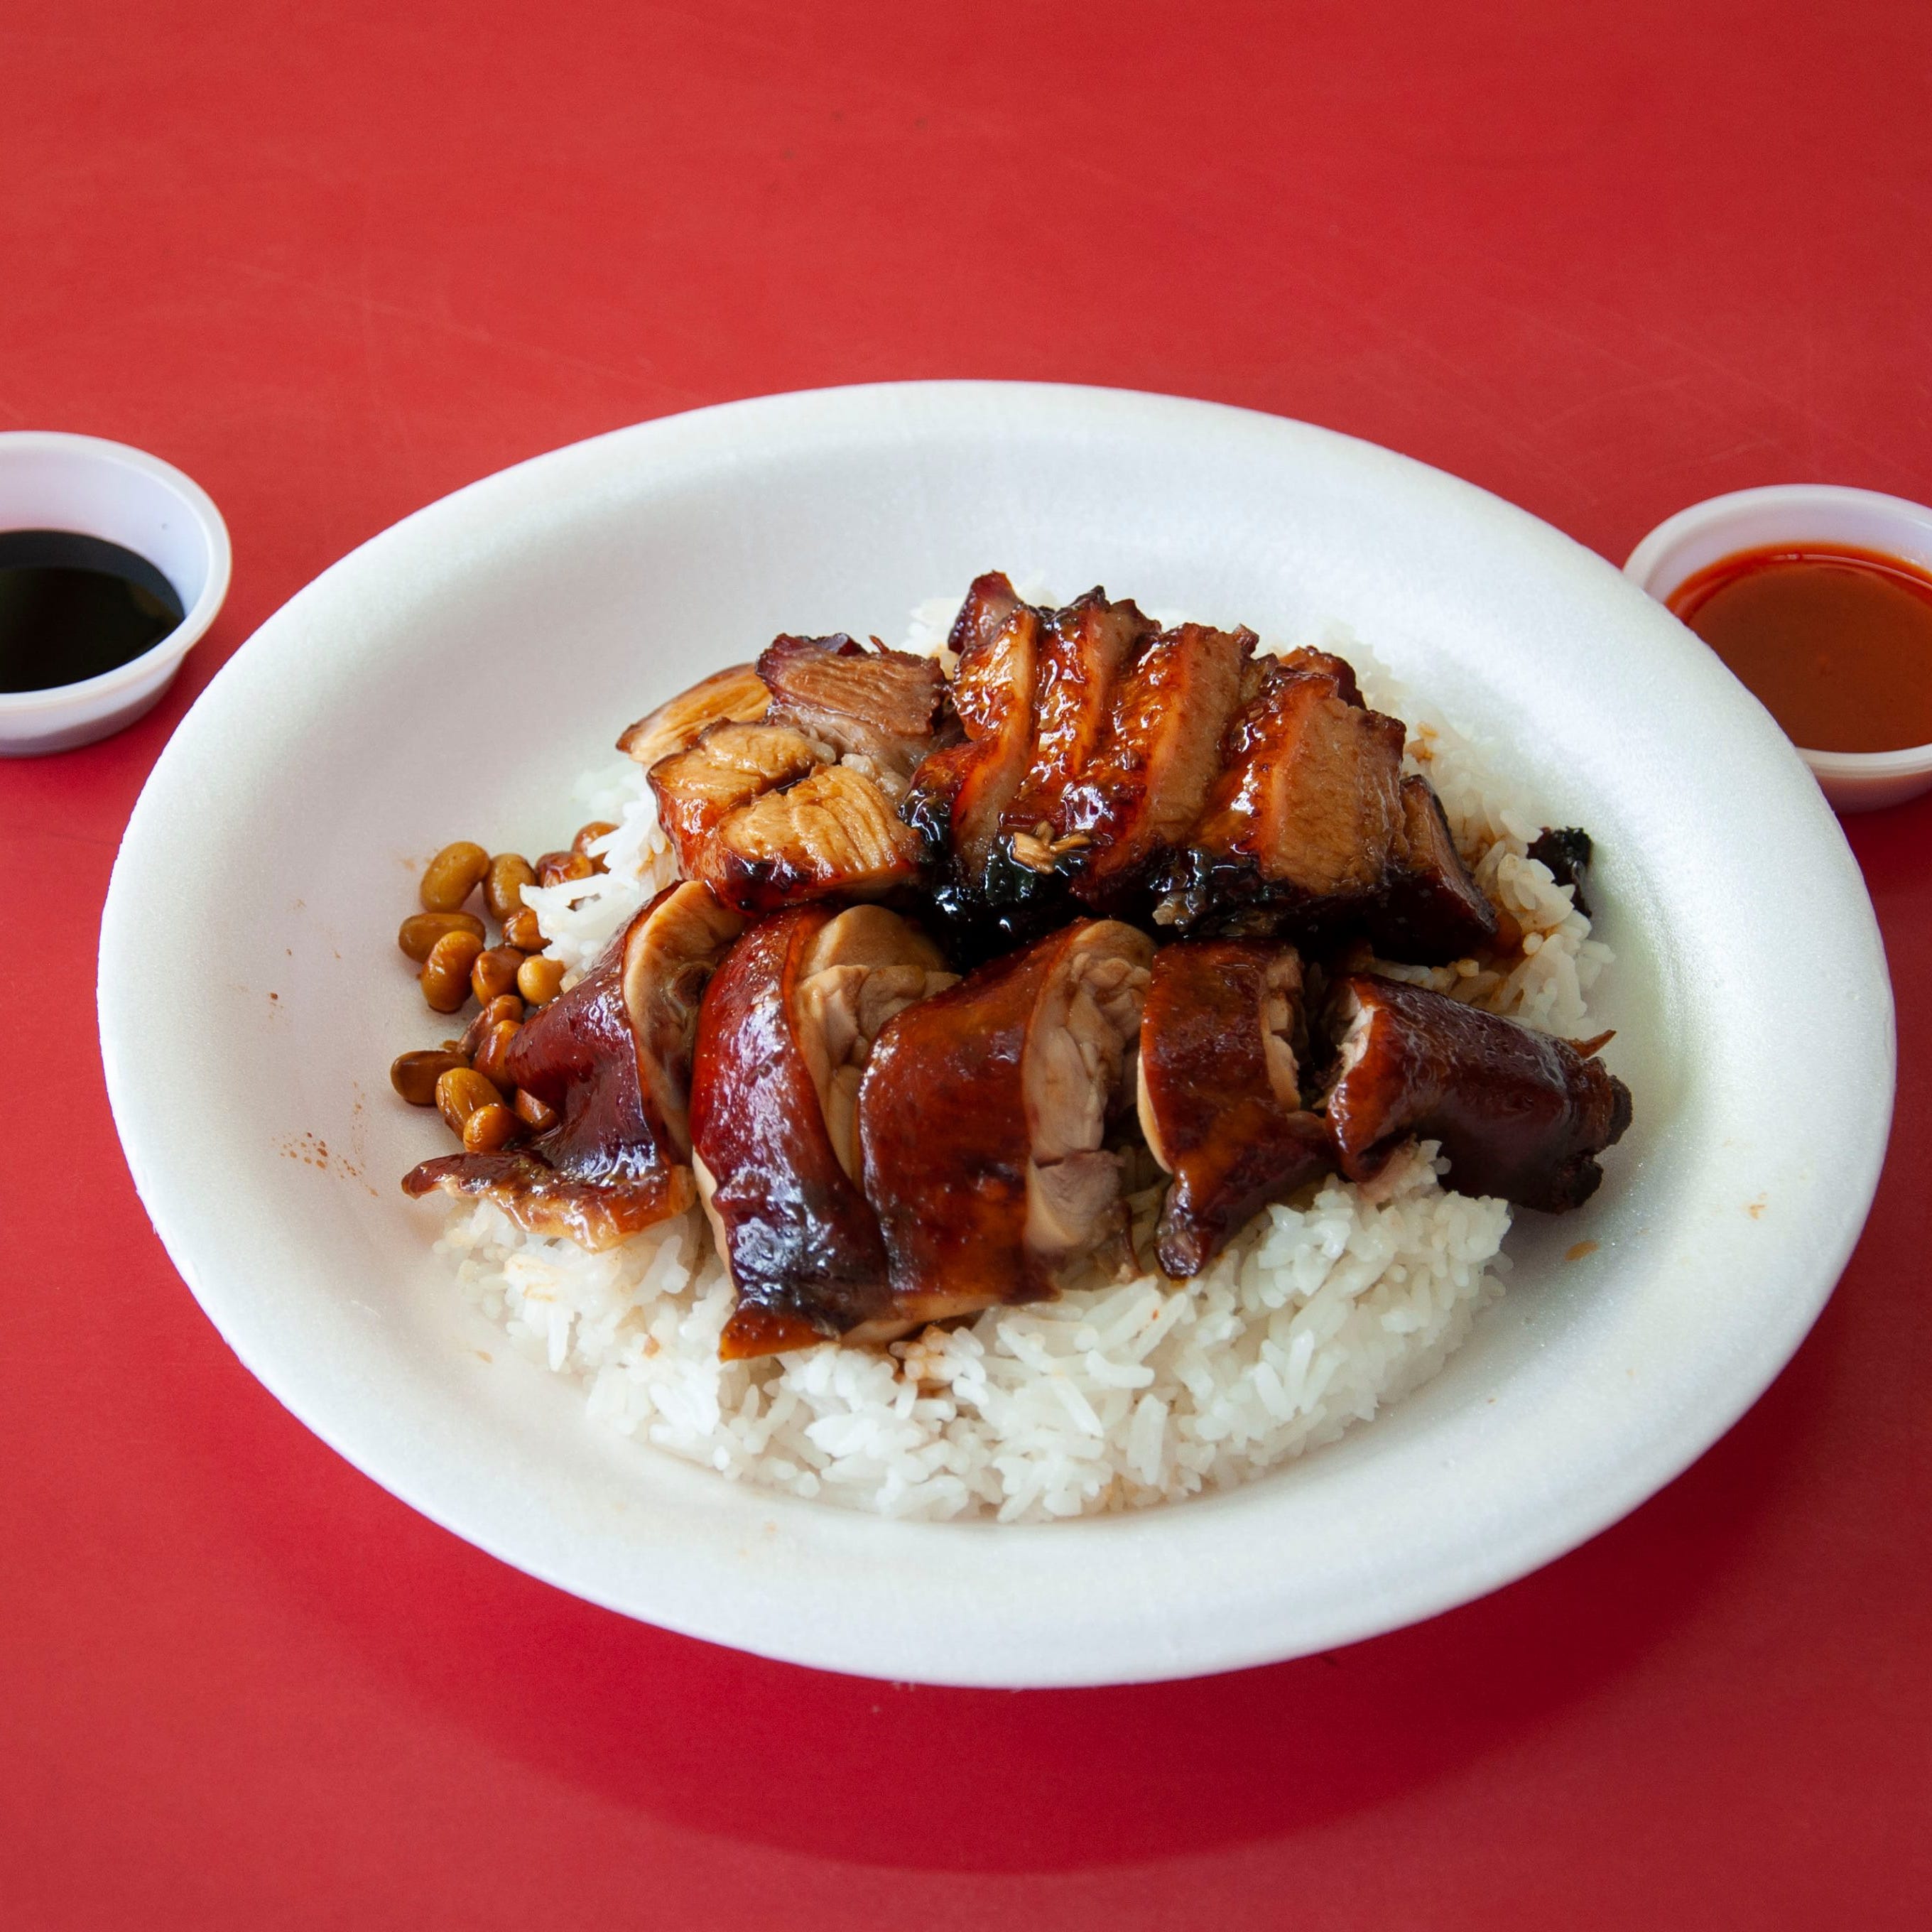 The cheapest Michelin-starred restaurant in the world is Liao Fan Hong Kong Soya Sauce Chicken Rice & Noodle, a street food stall in Singapore. The most expensive main dish there costs $2.20.